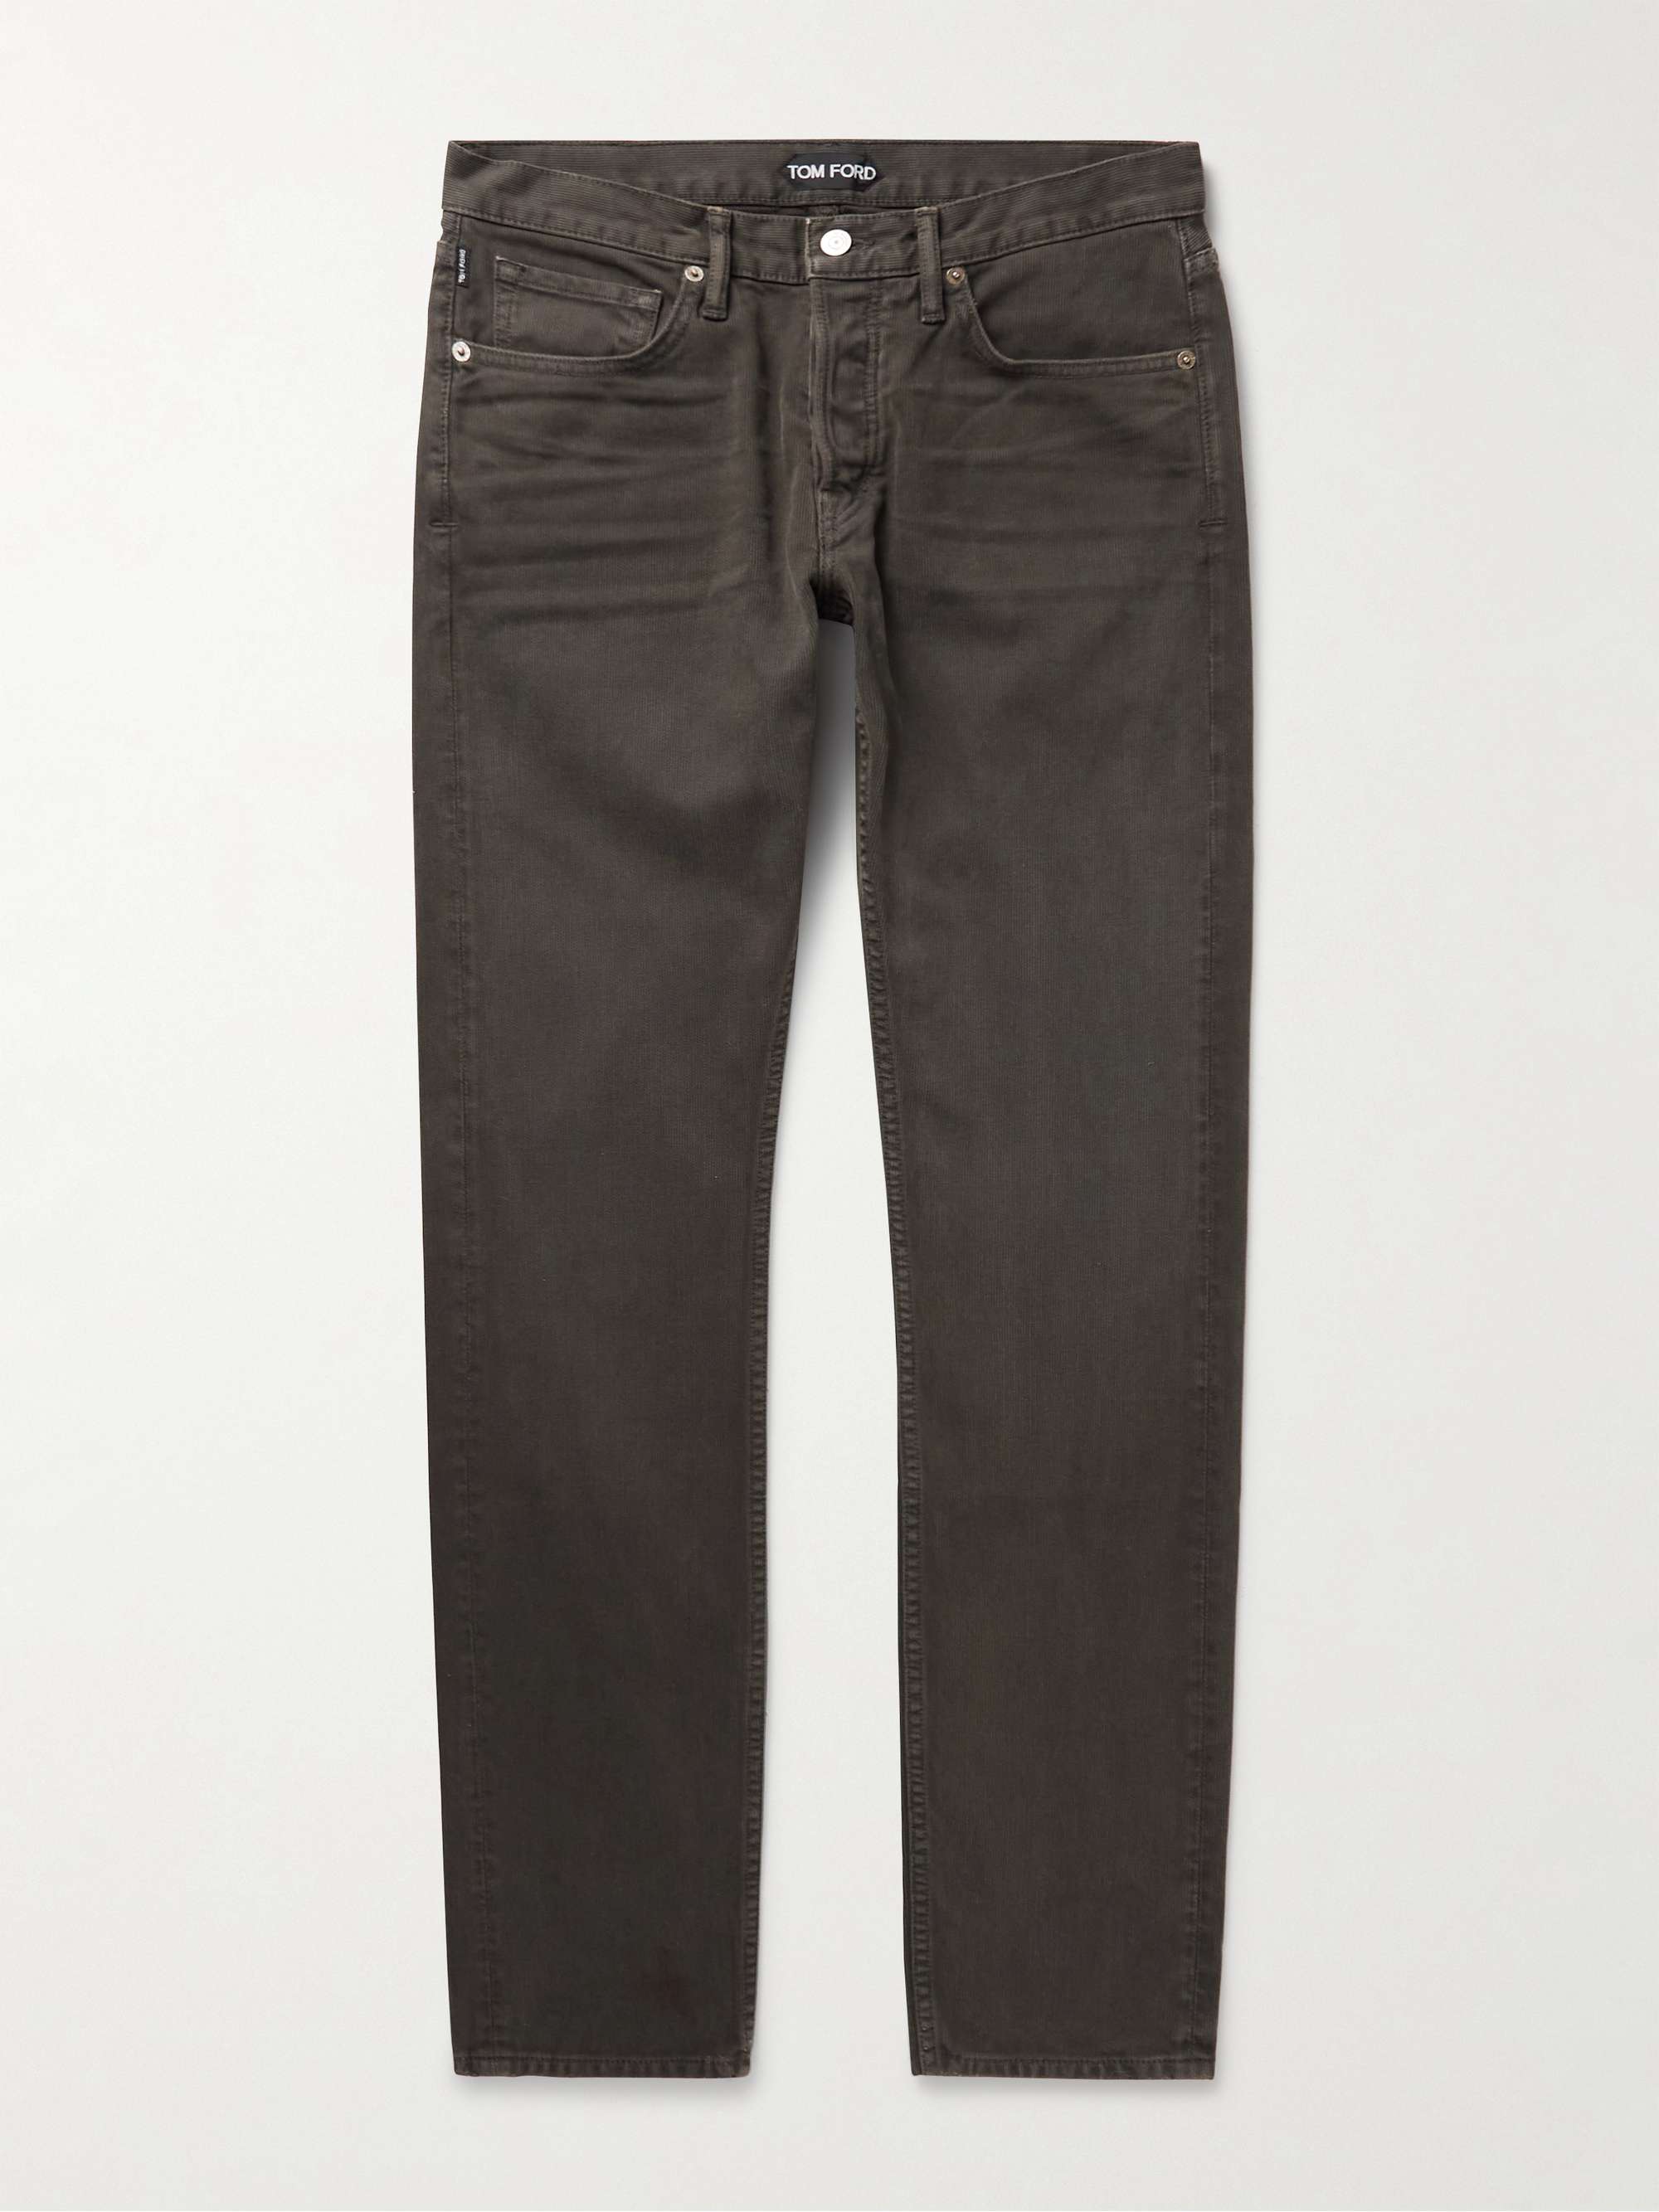 TOM FORD Slim-Fit Cotton-Corduory Trousers